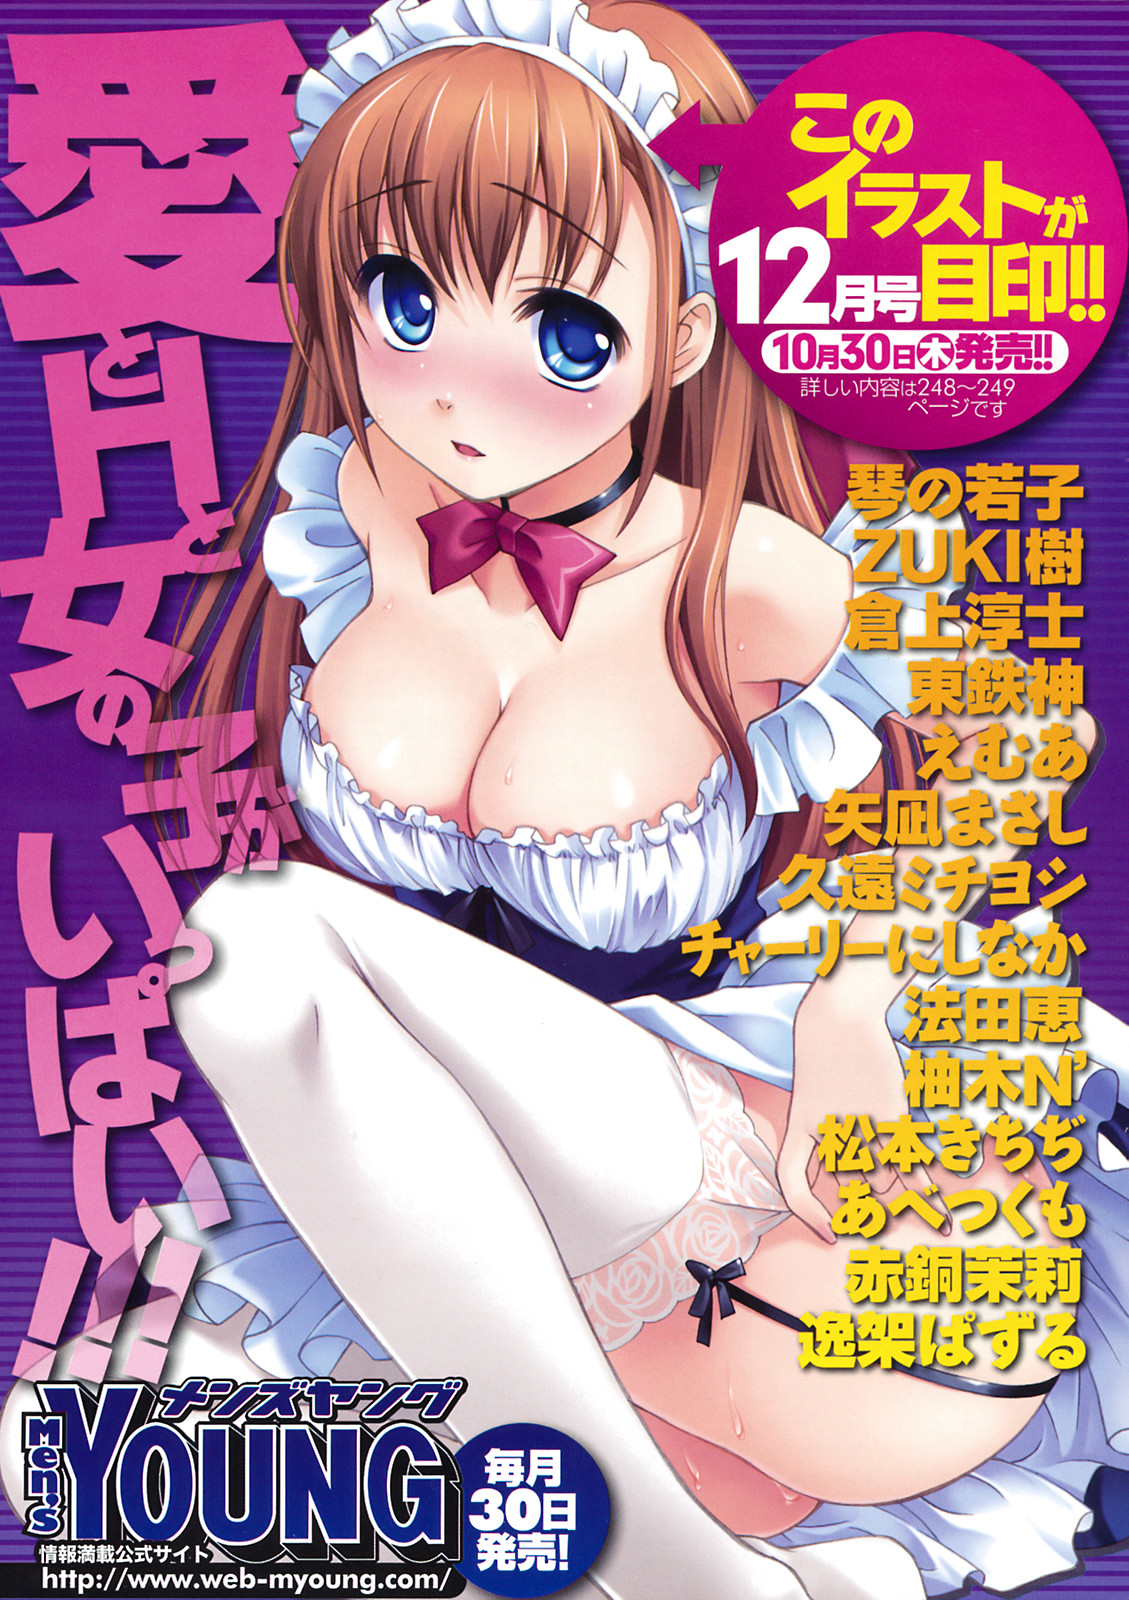 Men's Young Special Ikazuchi Vol 08 page 8 full